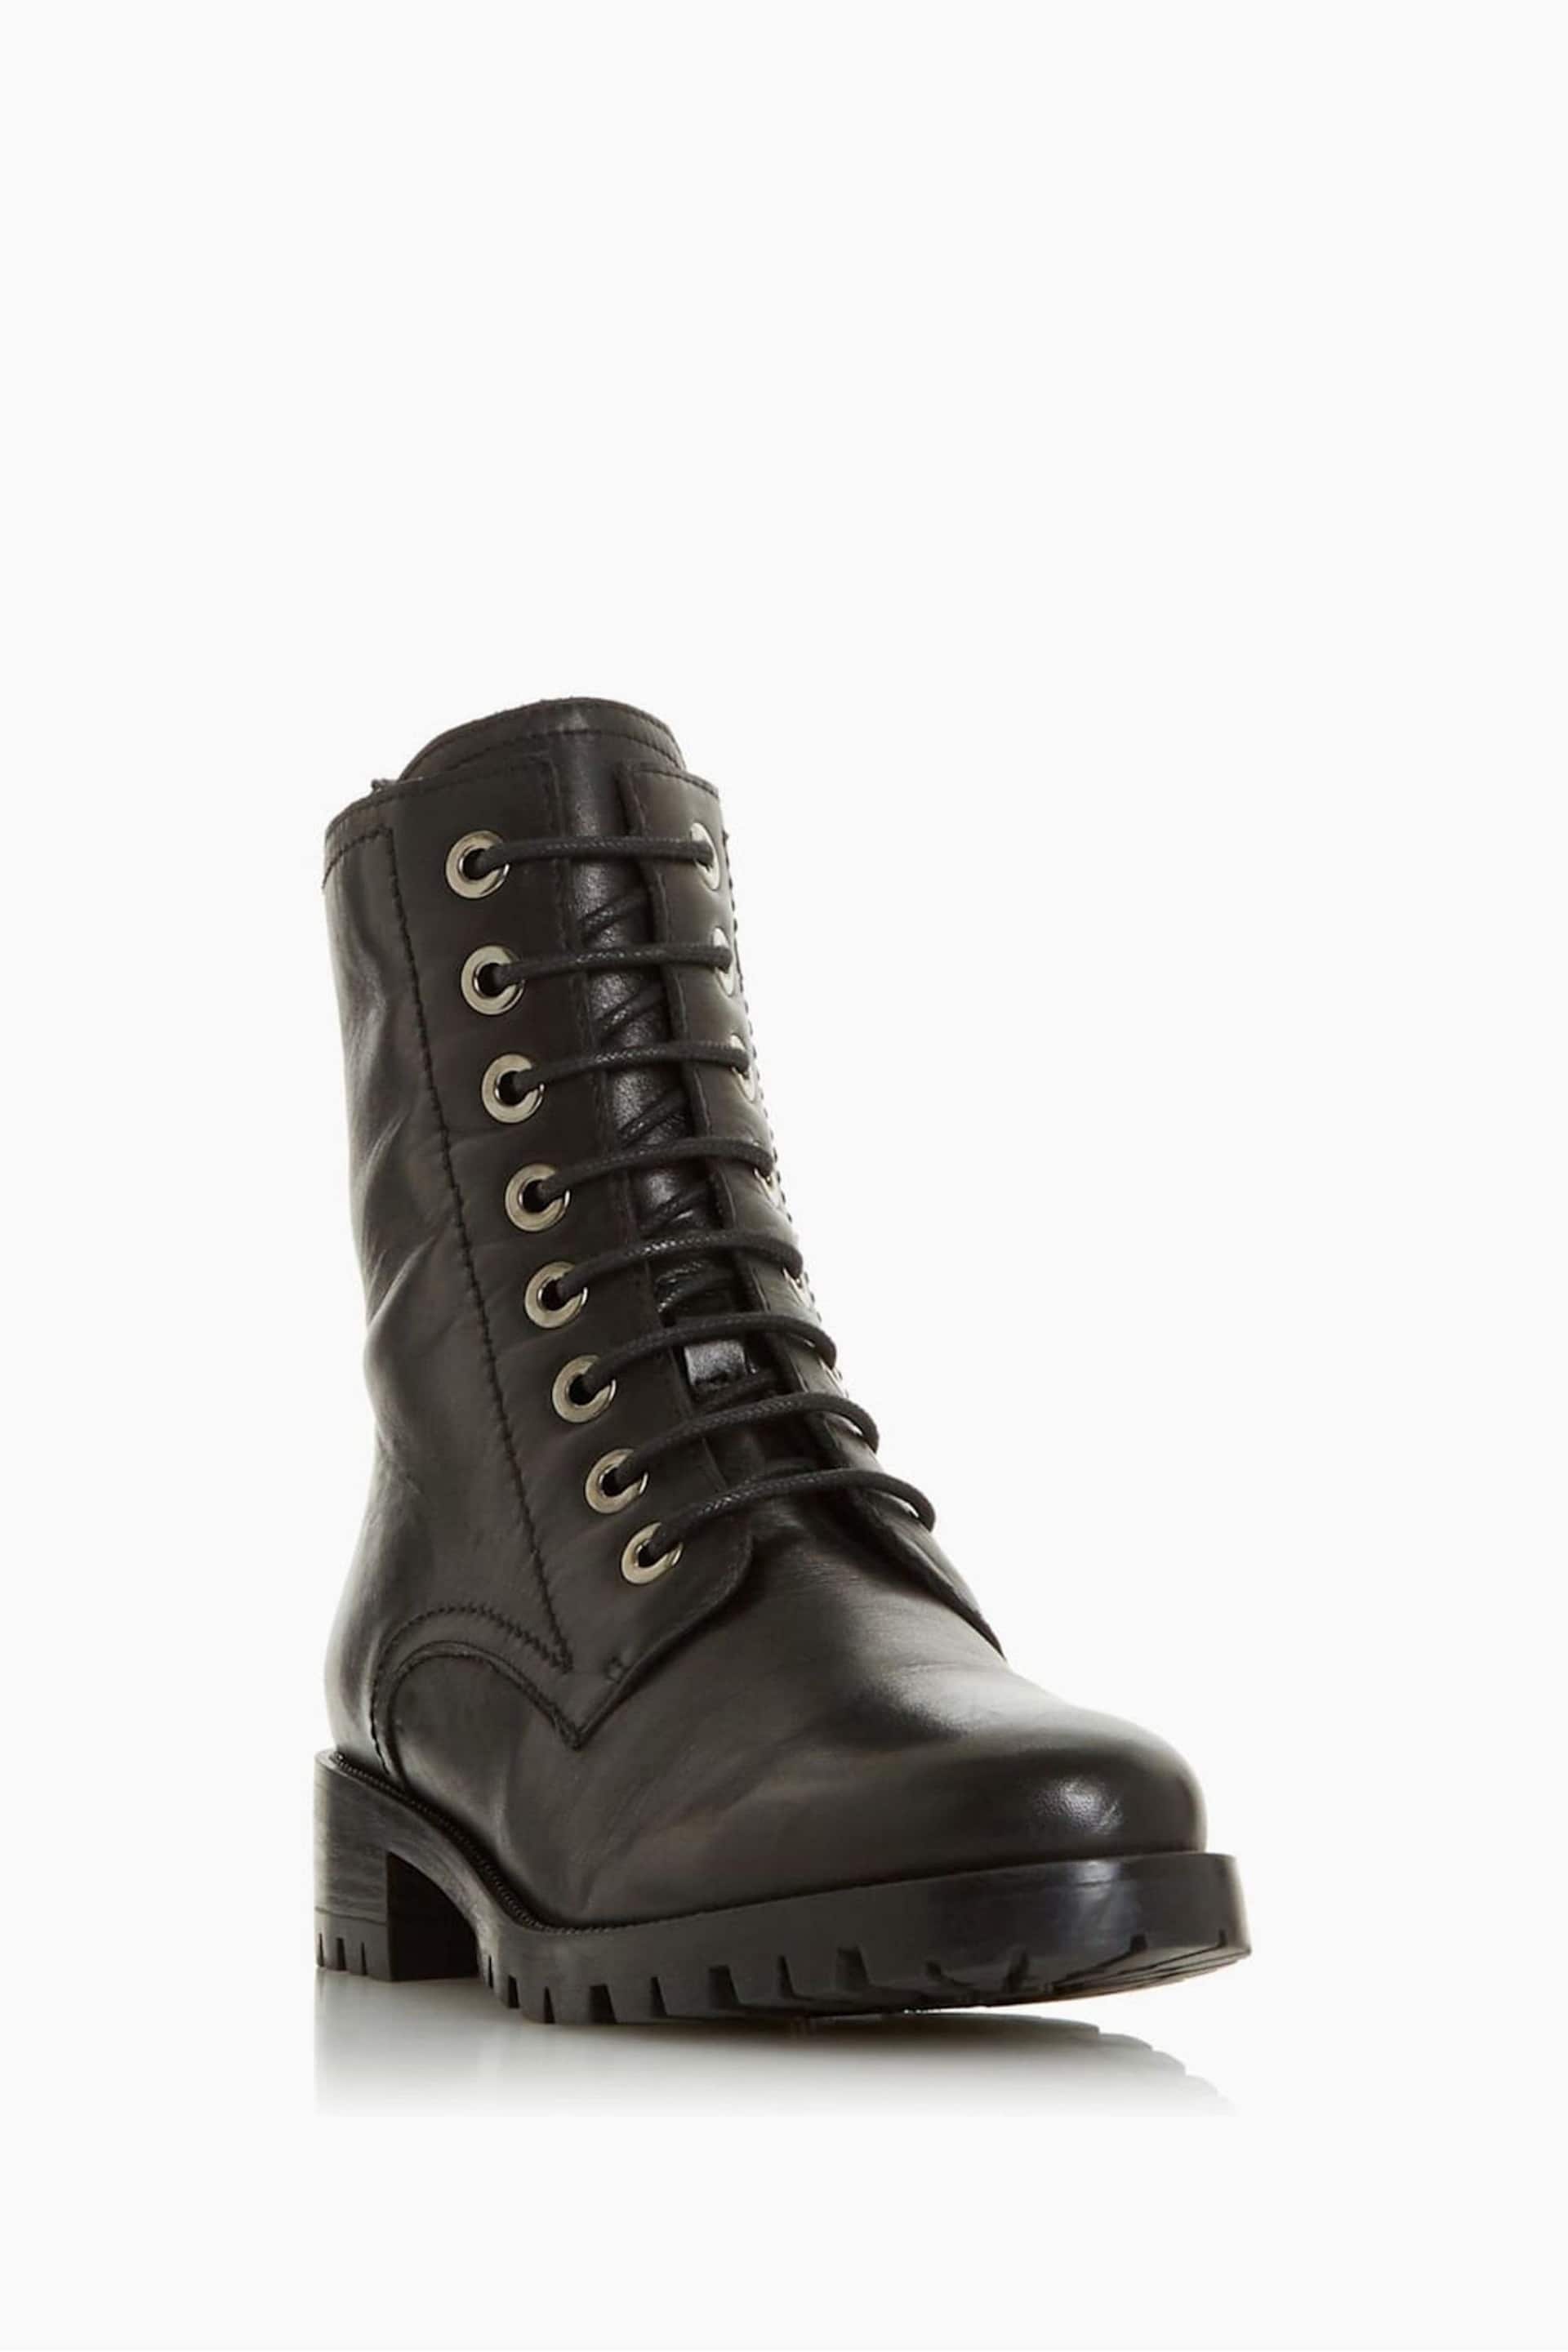 Dune London Black Wide Fit Prestone Cleated Hiker Boots - Image 3 of 5